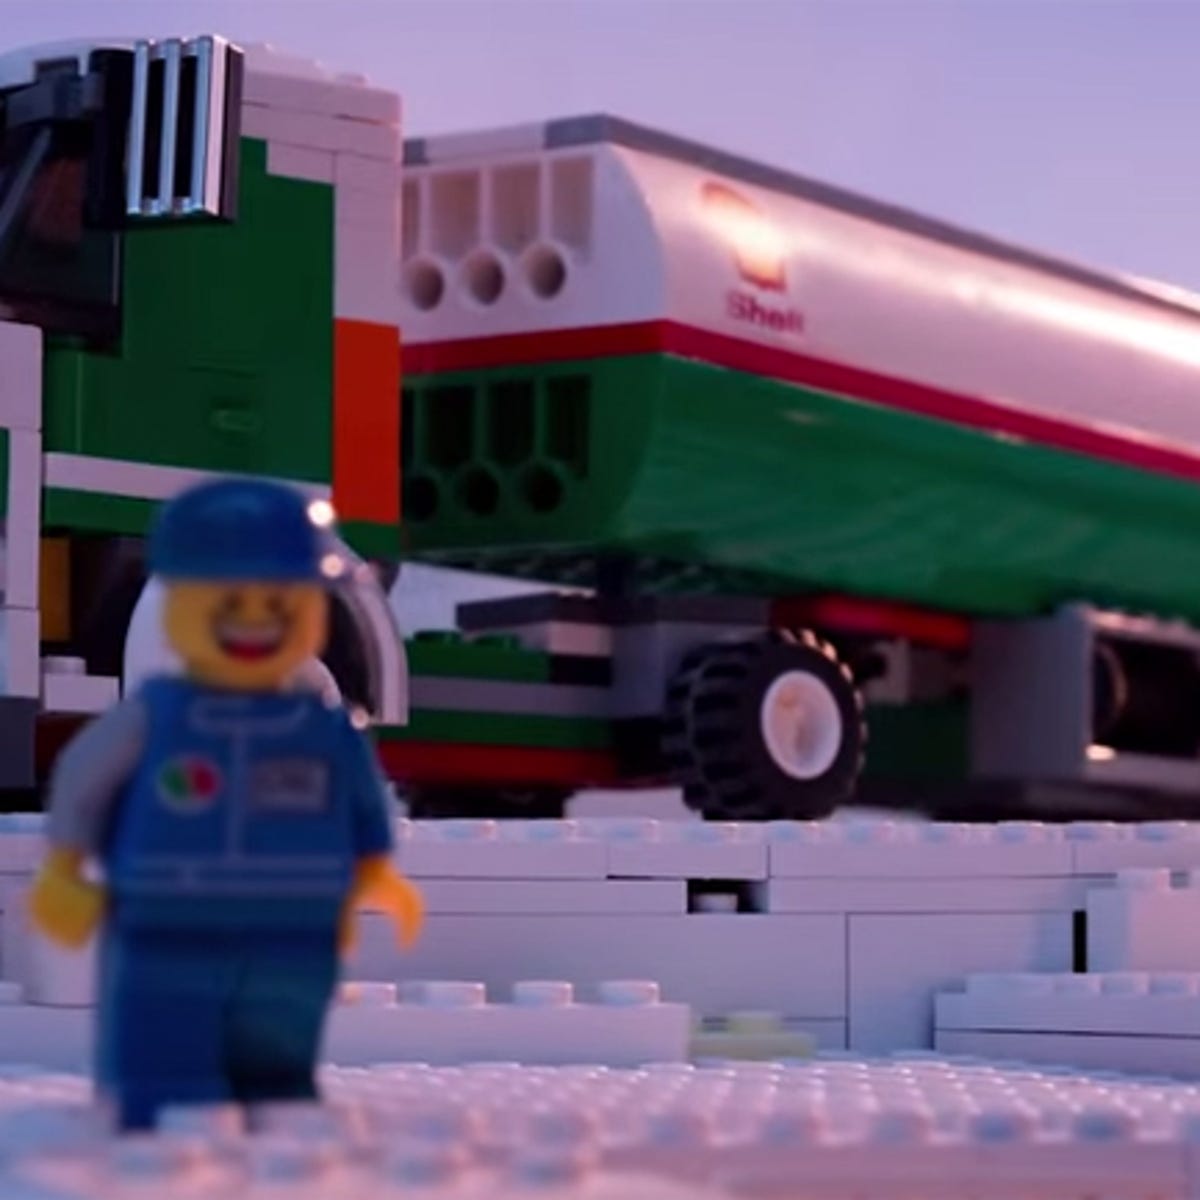 Lego with Shell over Greenpeace campaign -